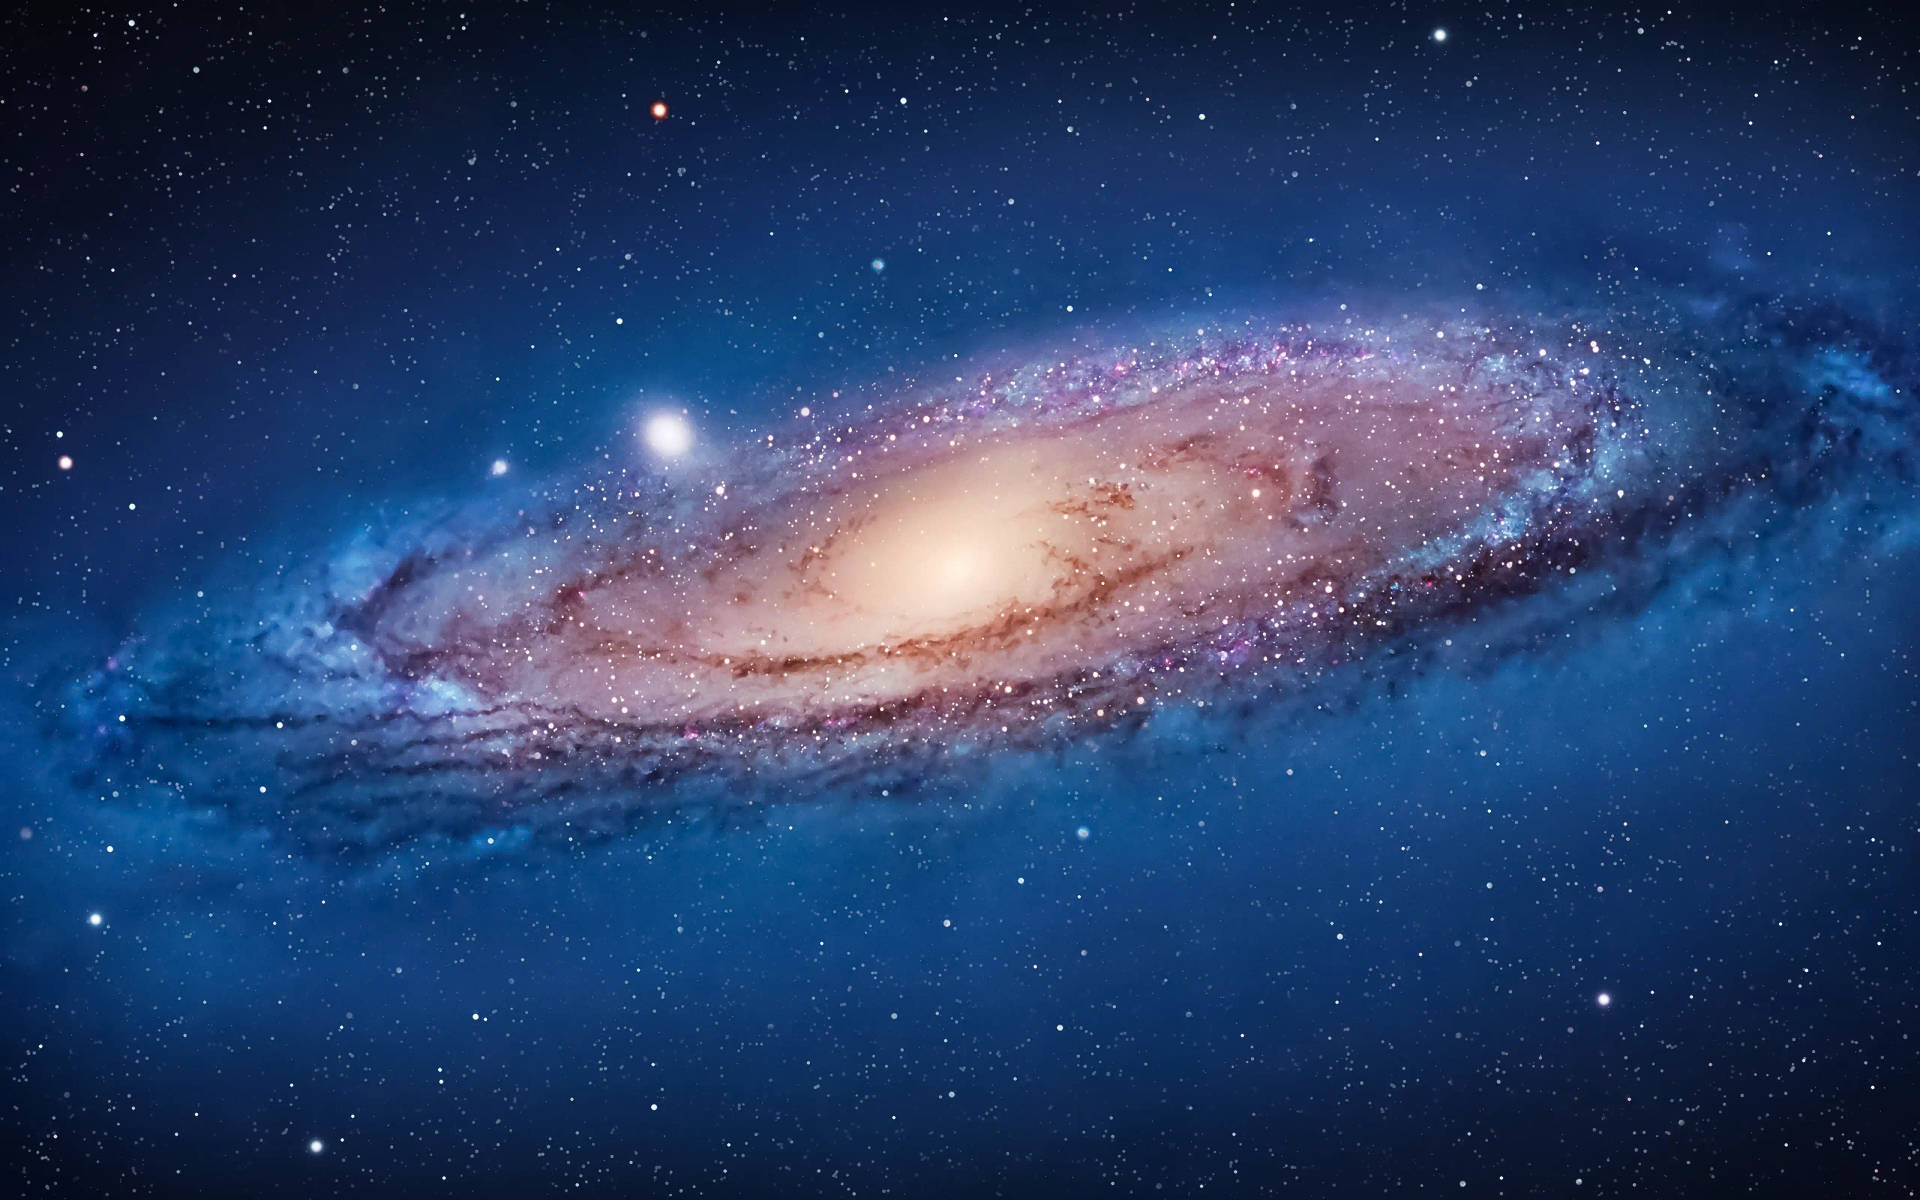 Caption: Macbook Air 4k With A Unique Galaxy Wallpaper. Background